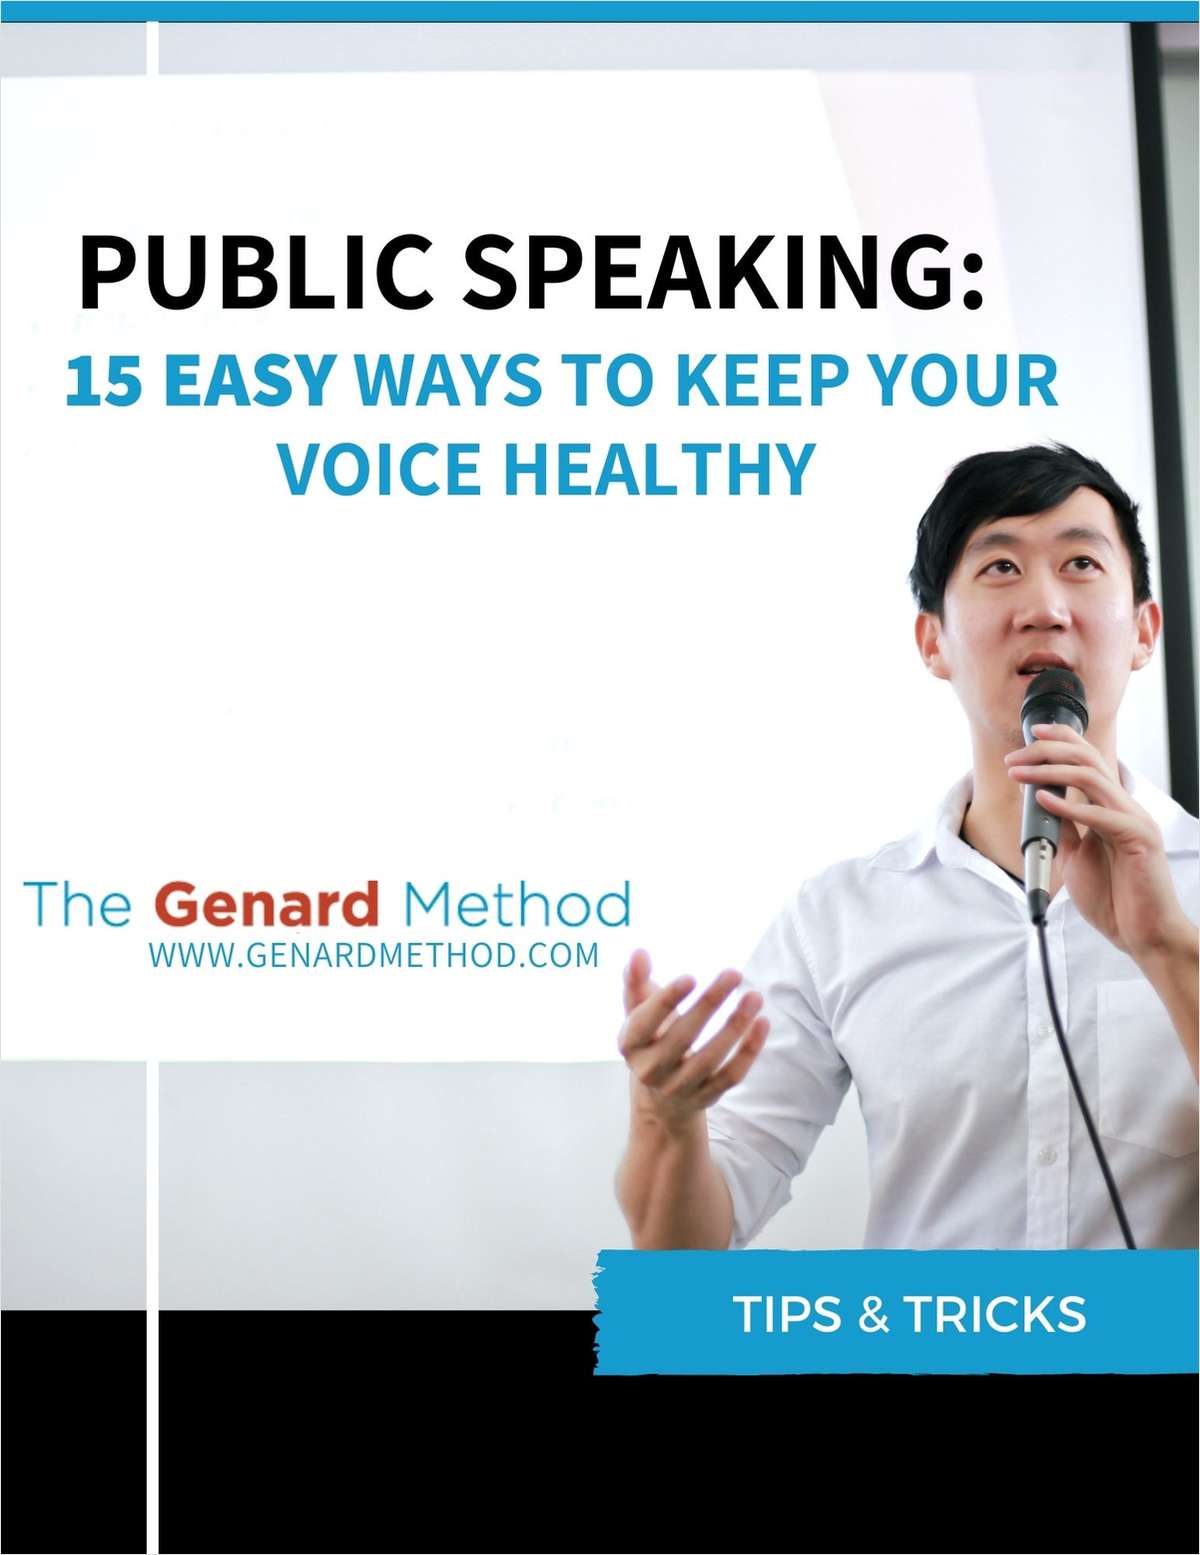 Public Speaking: 15 Easy Ways to Keep Your Voice Healthy